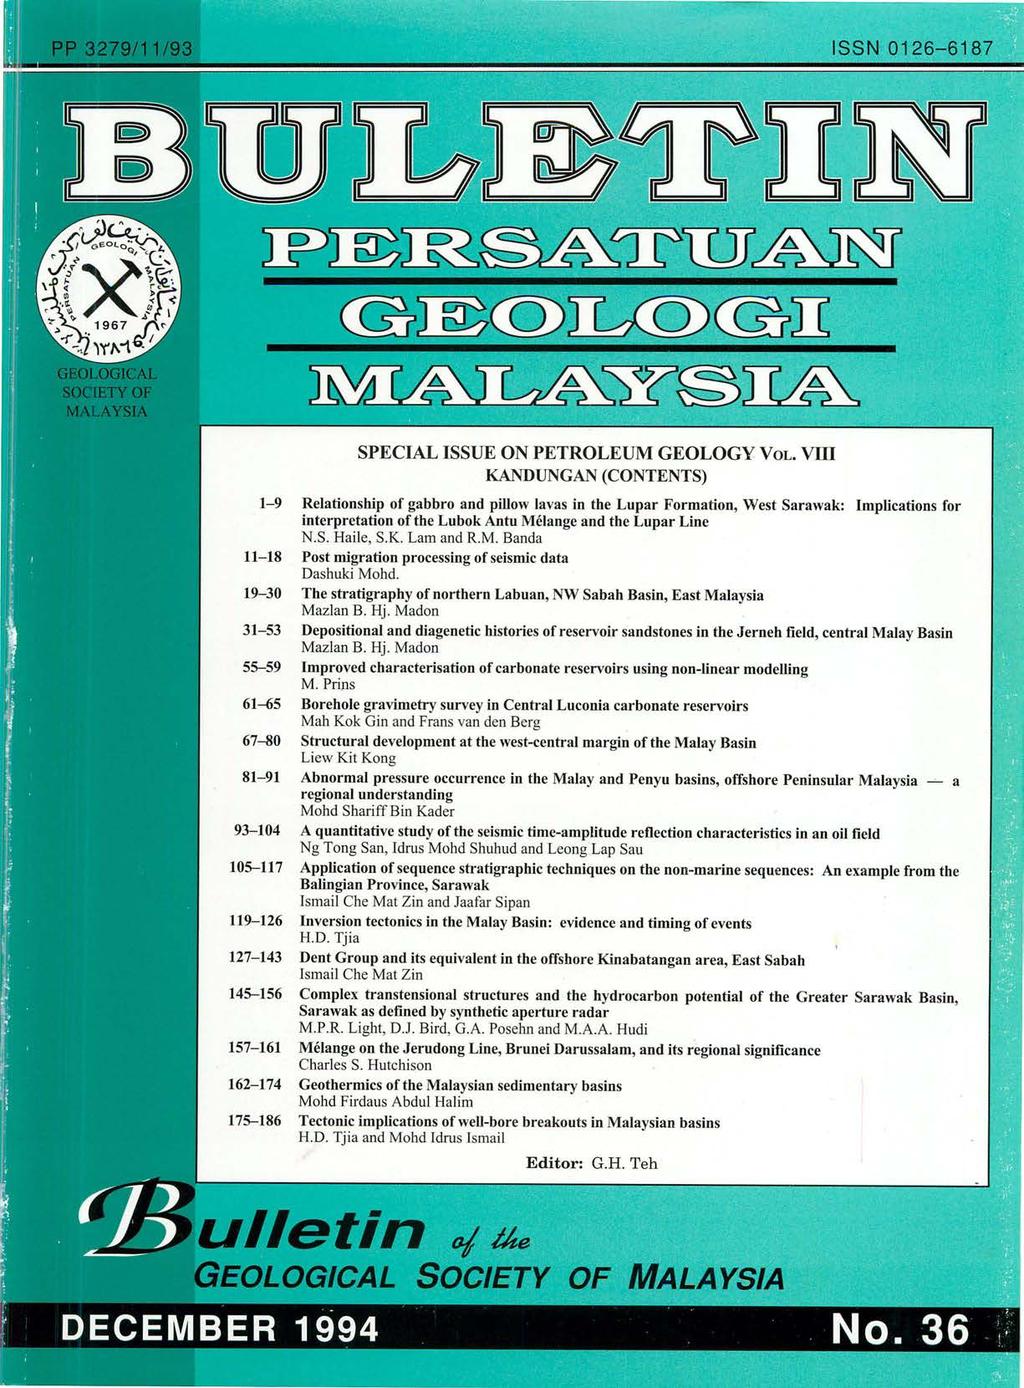 ISSN 0126-6187 SPECIAL ISSUE ON PETROLEUM GEOLOGY VOL.